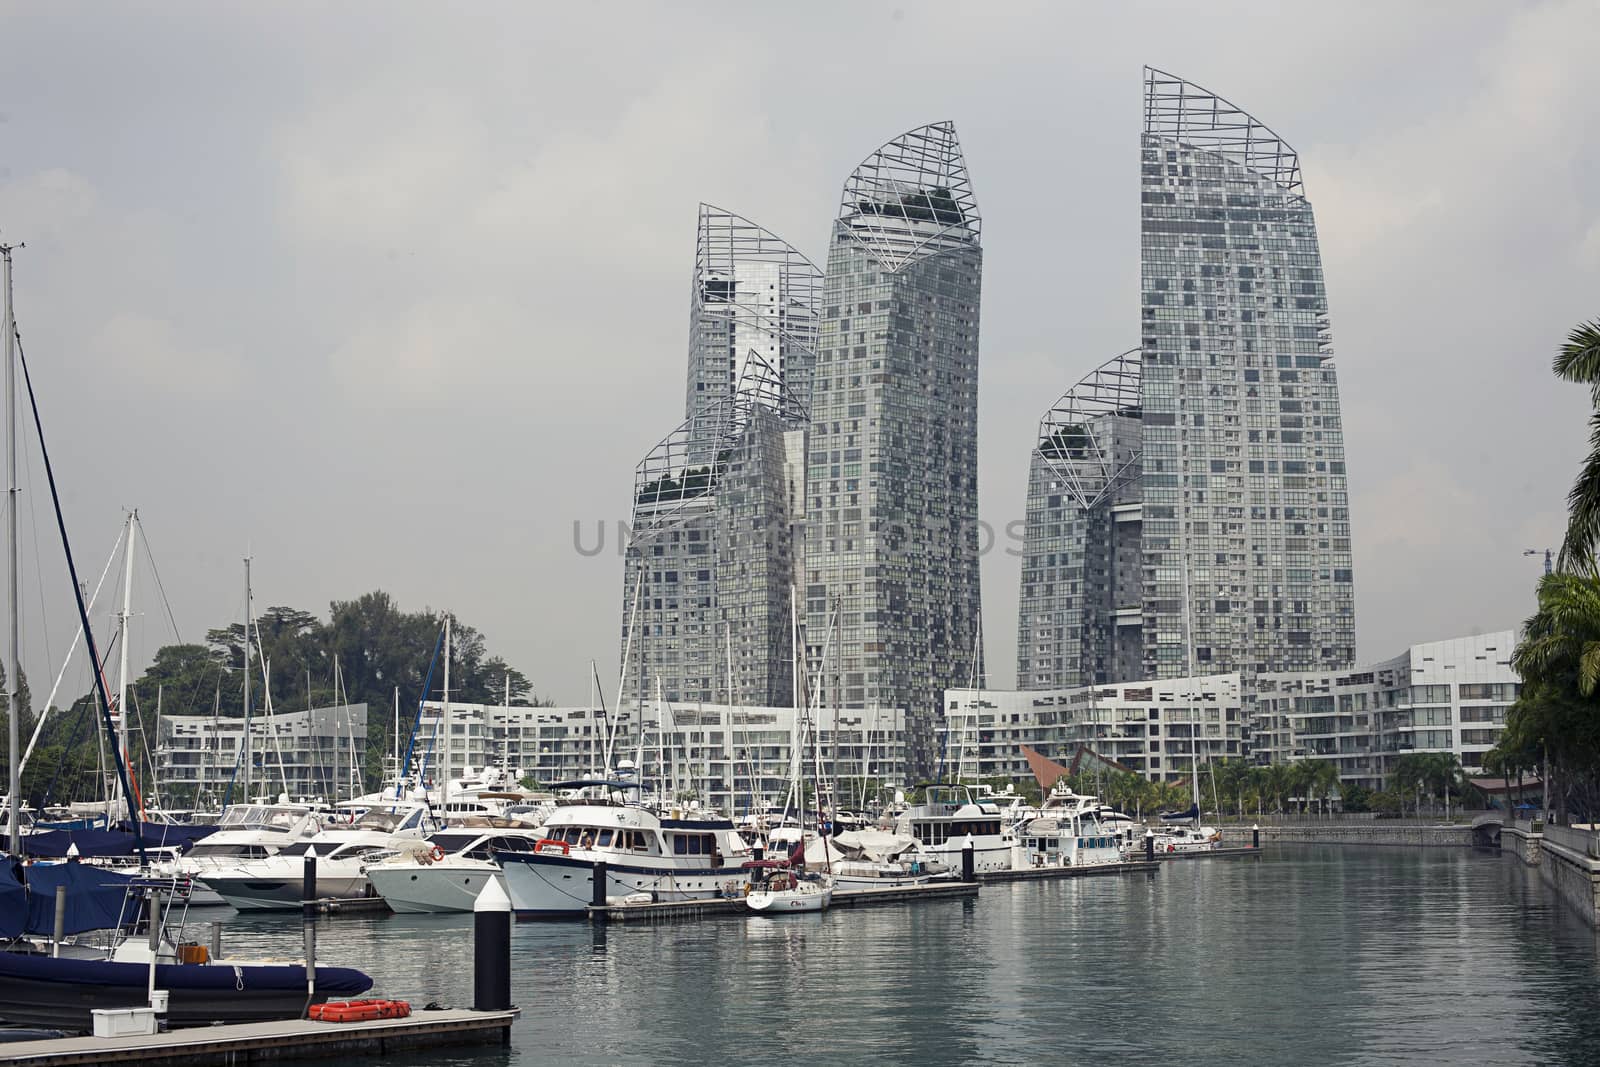 Reflections at Keppel Bay by Daniel Libeskind by Vanzyst